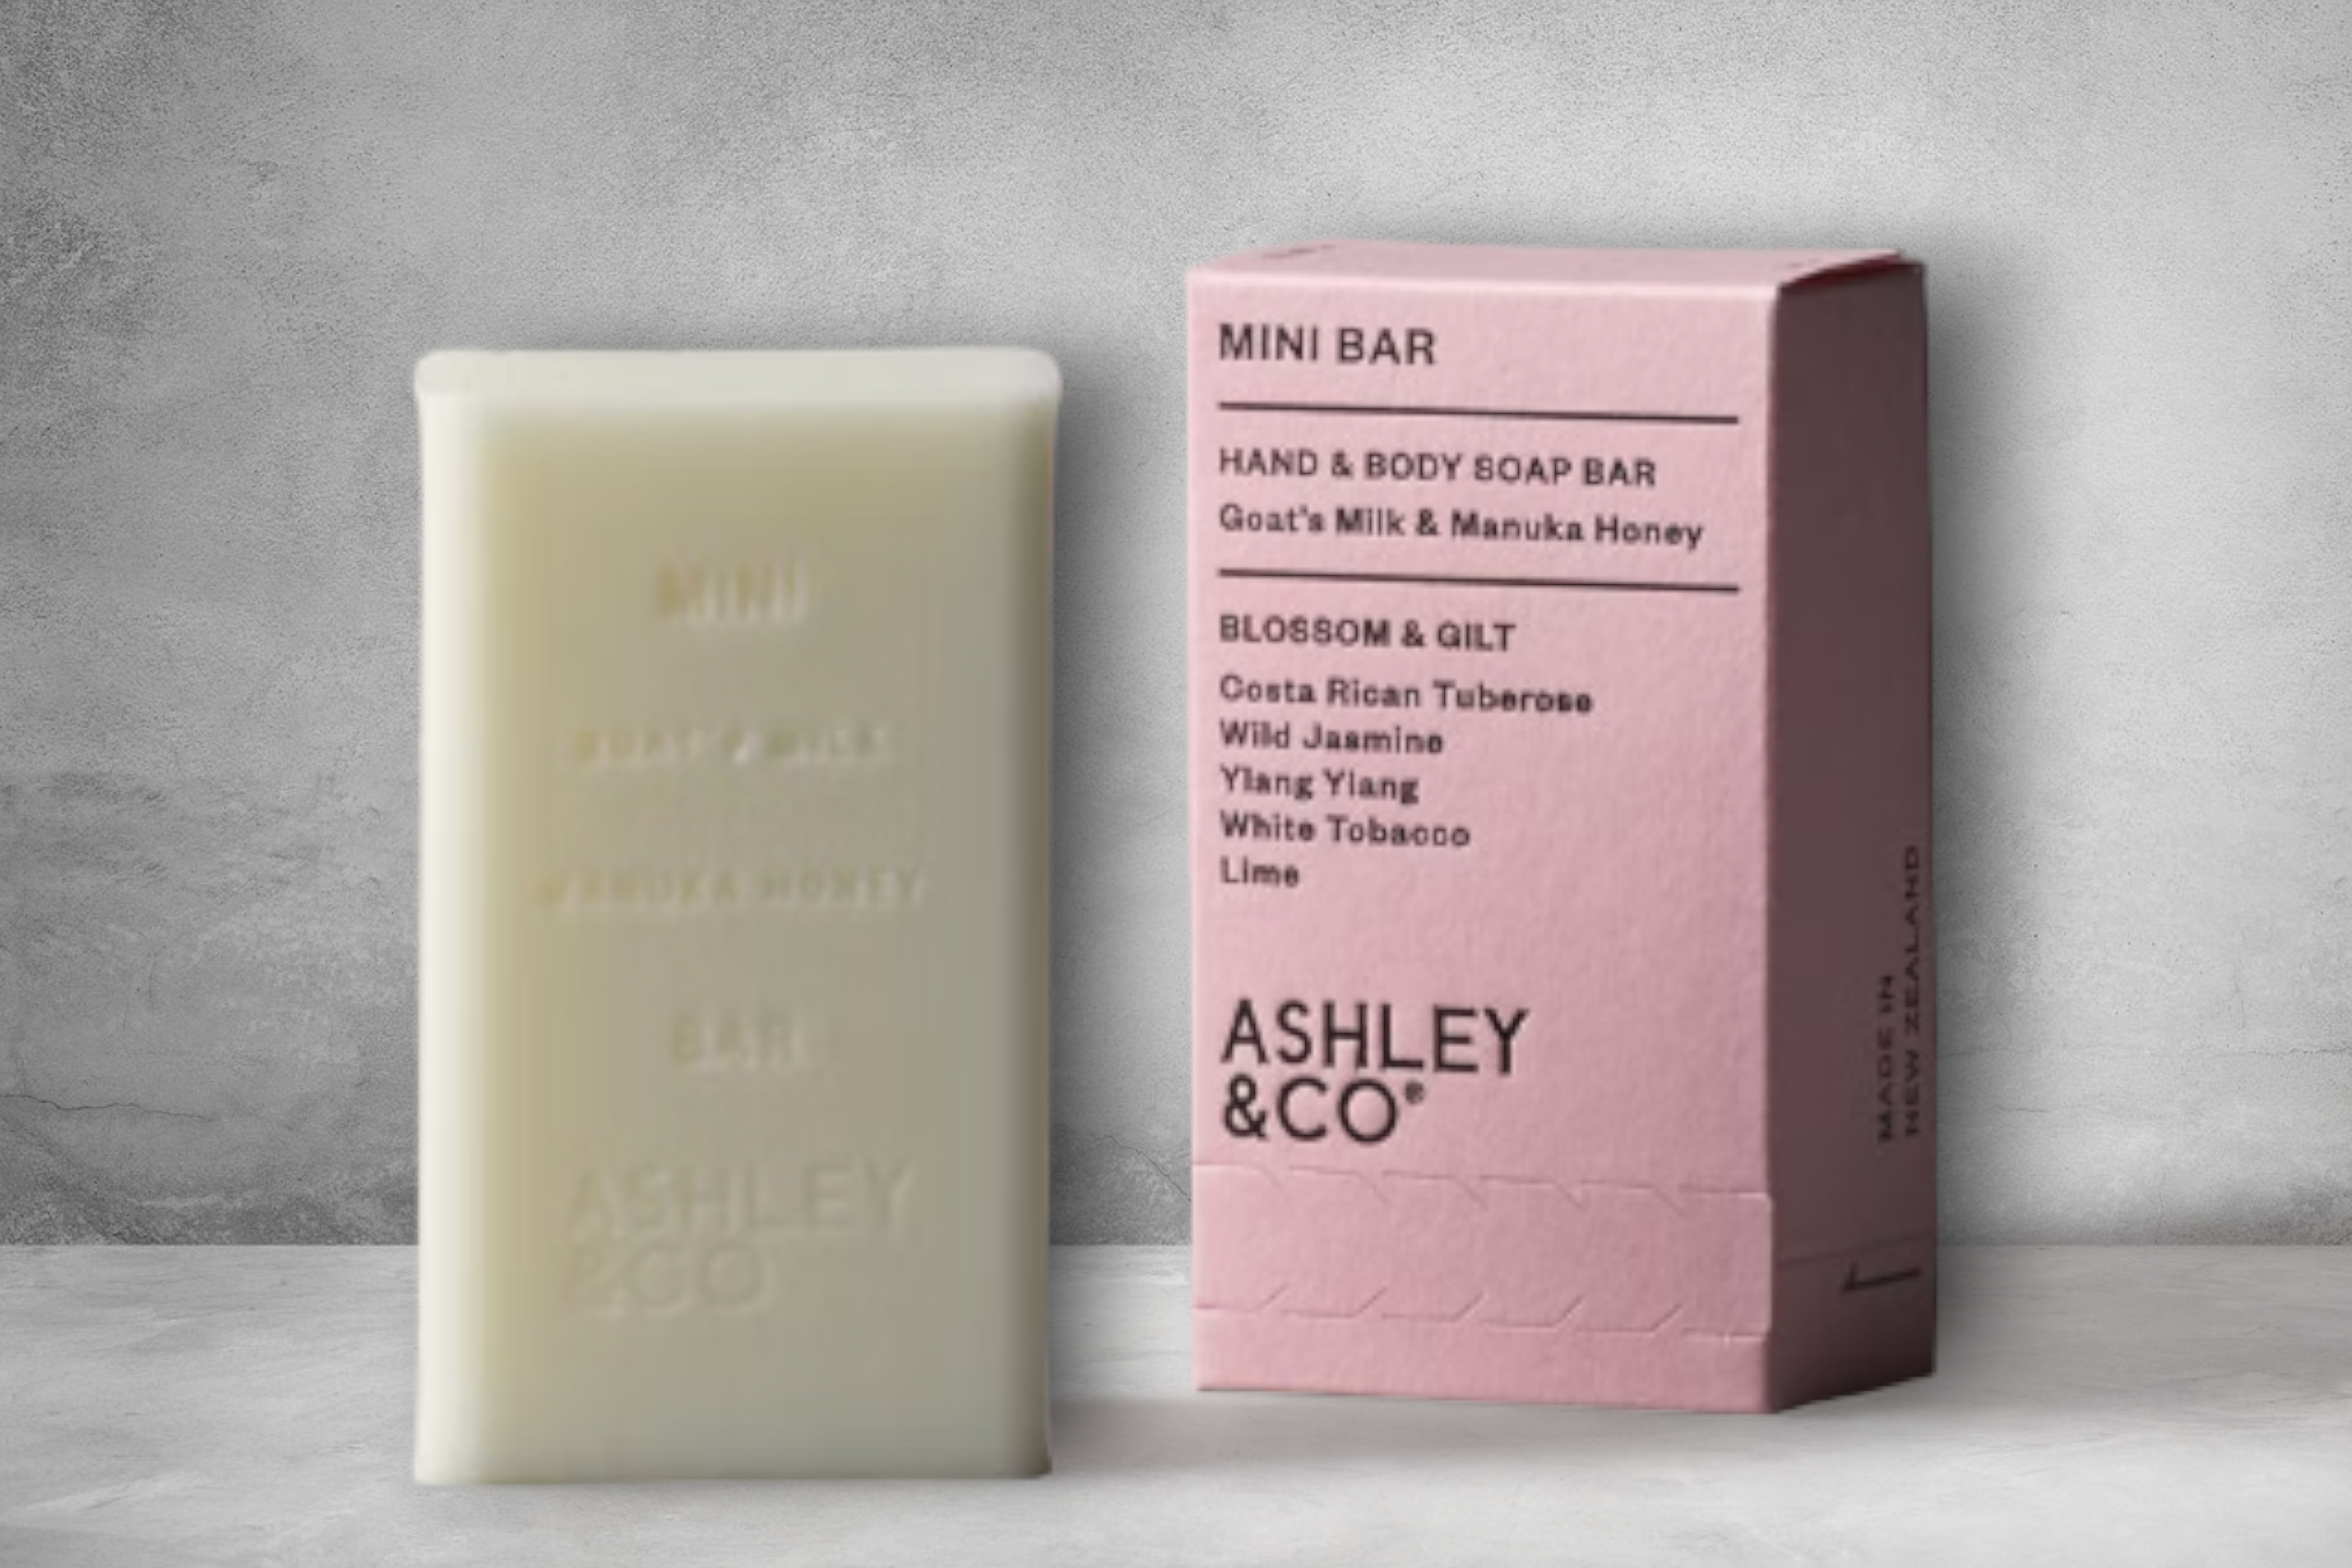 A cleansing bar of Blossom & Gilt Mini Bar by Ashley & Co hand and body soap alongside its stylish pink packaging, highlighting a blend of goats milk and Manuka honey with fragrant botanical notes.